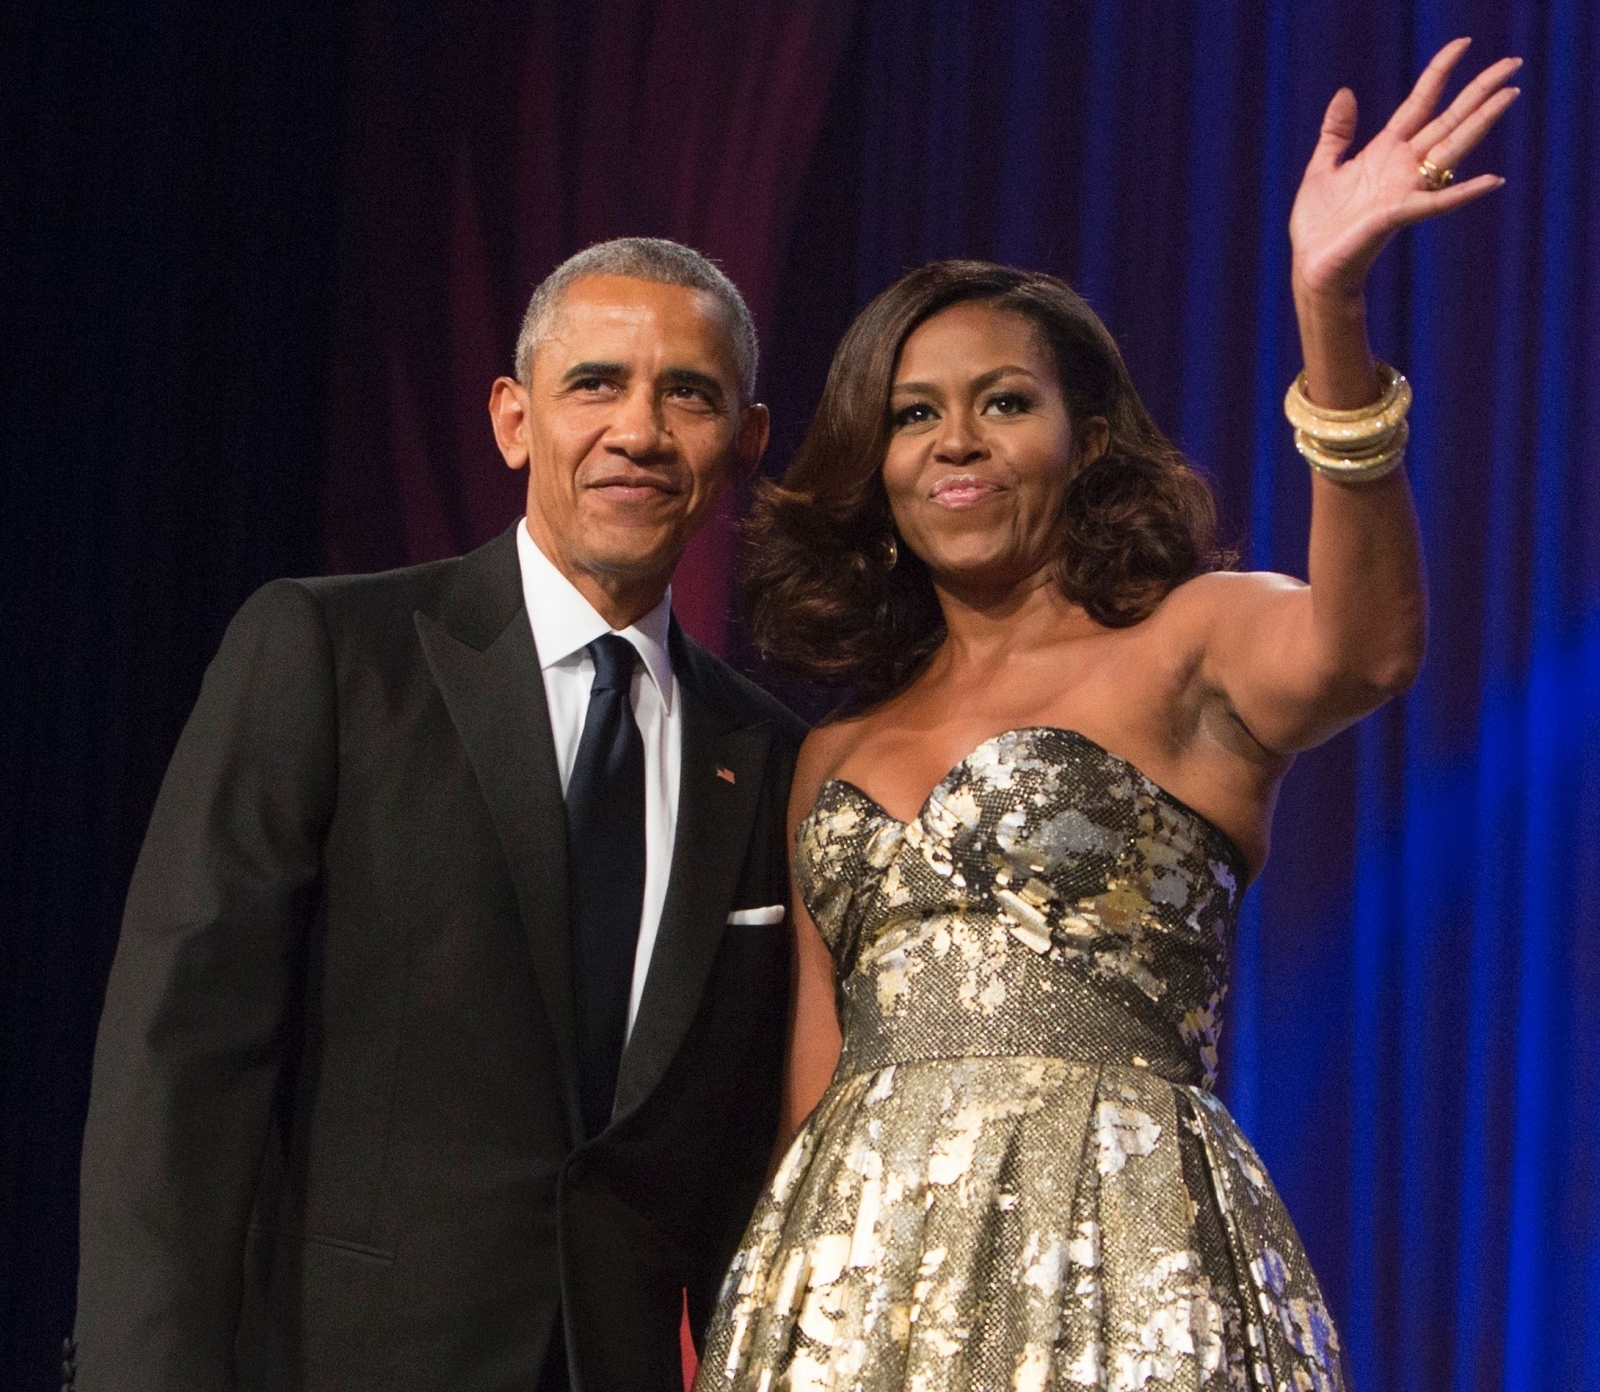 Michelle Obama once warned Barack she might find another guy IBTimes UK pic